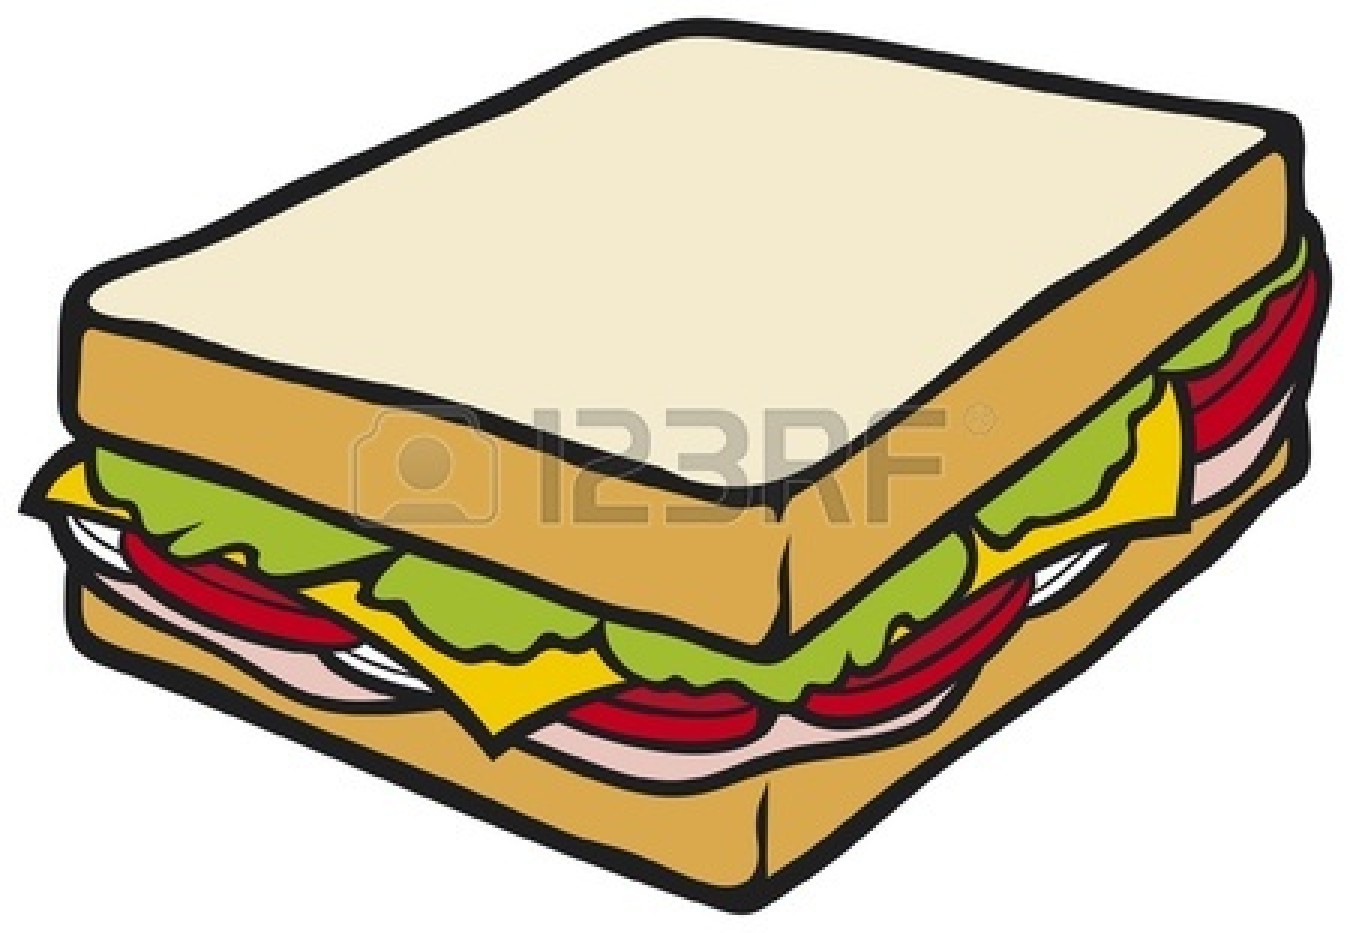 Cheese Sandwich Clipart   Clipart Panda   Free Clipart Images